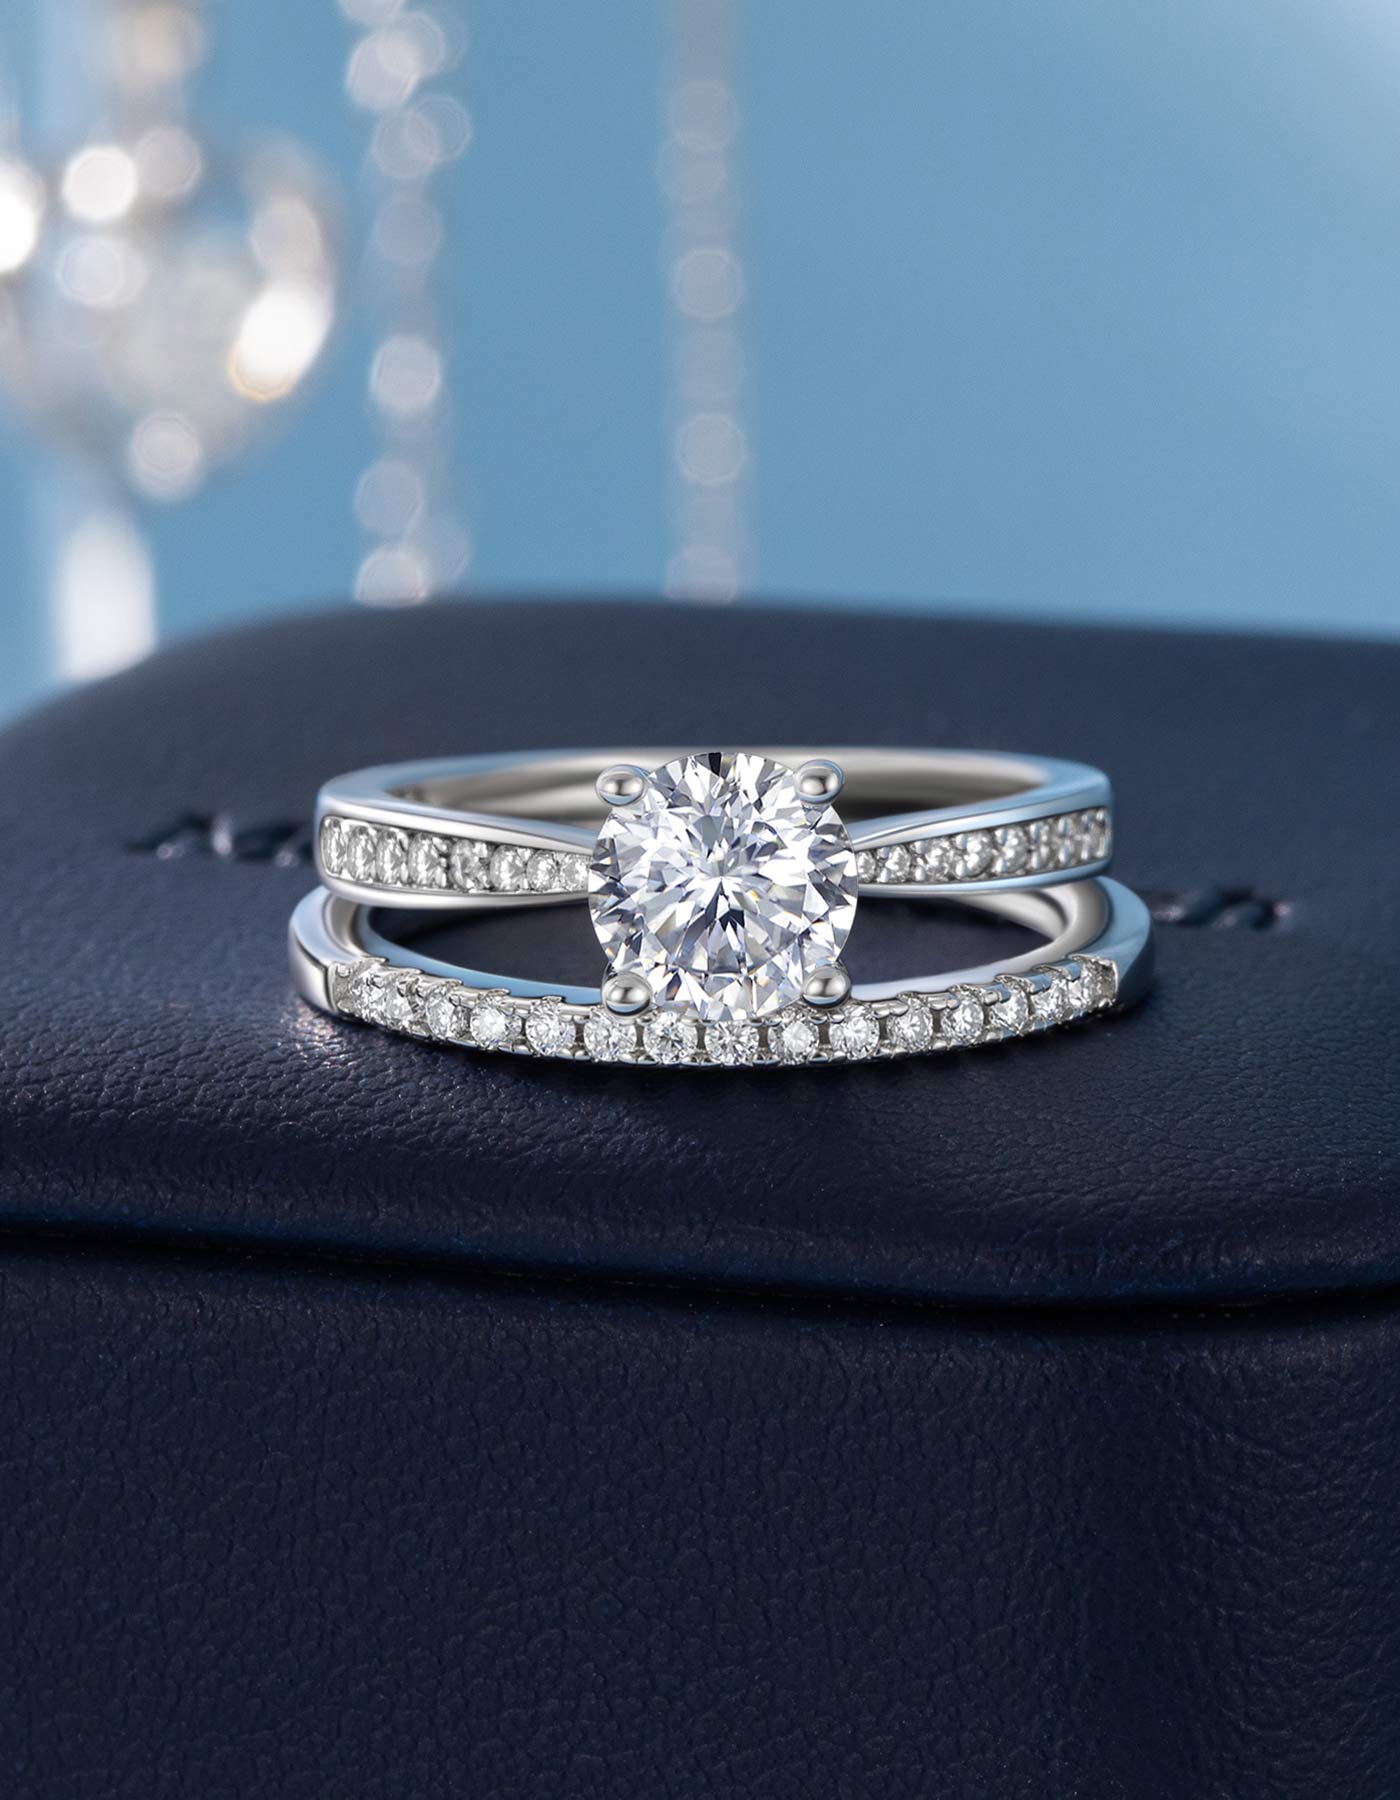 MomentWish Promise Ring Wedding Band With Moissanite Earrings Set